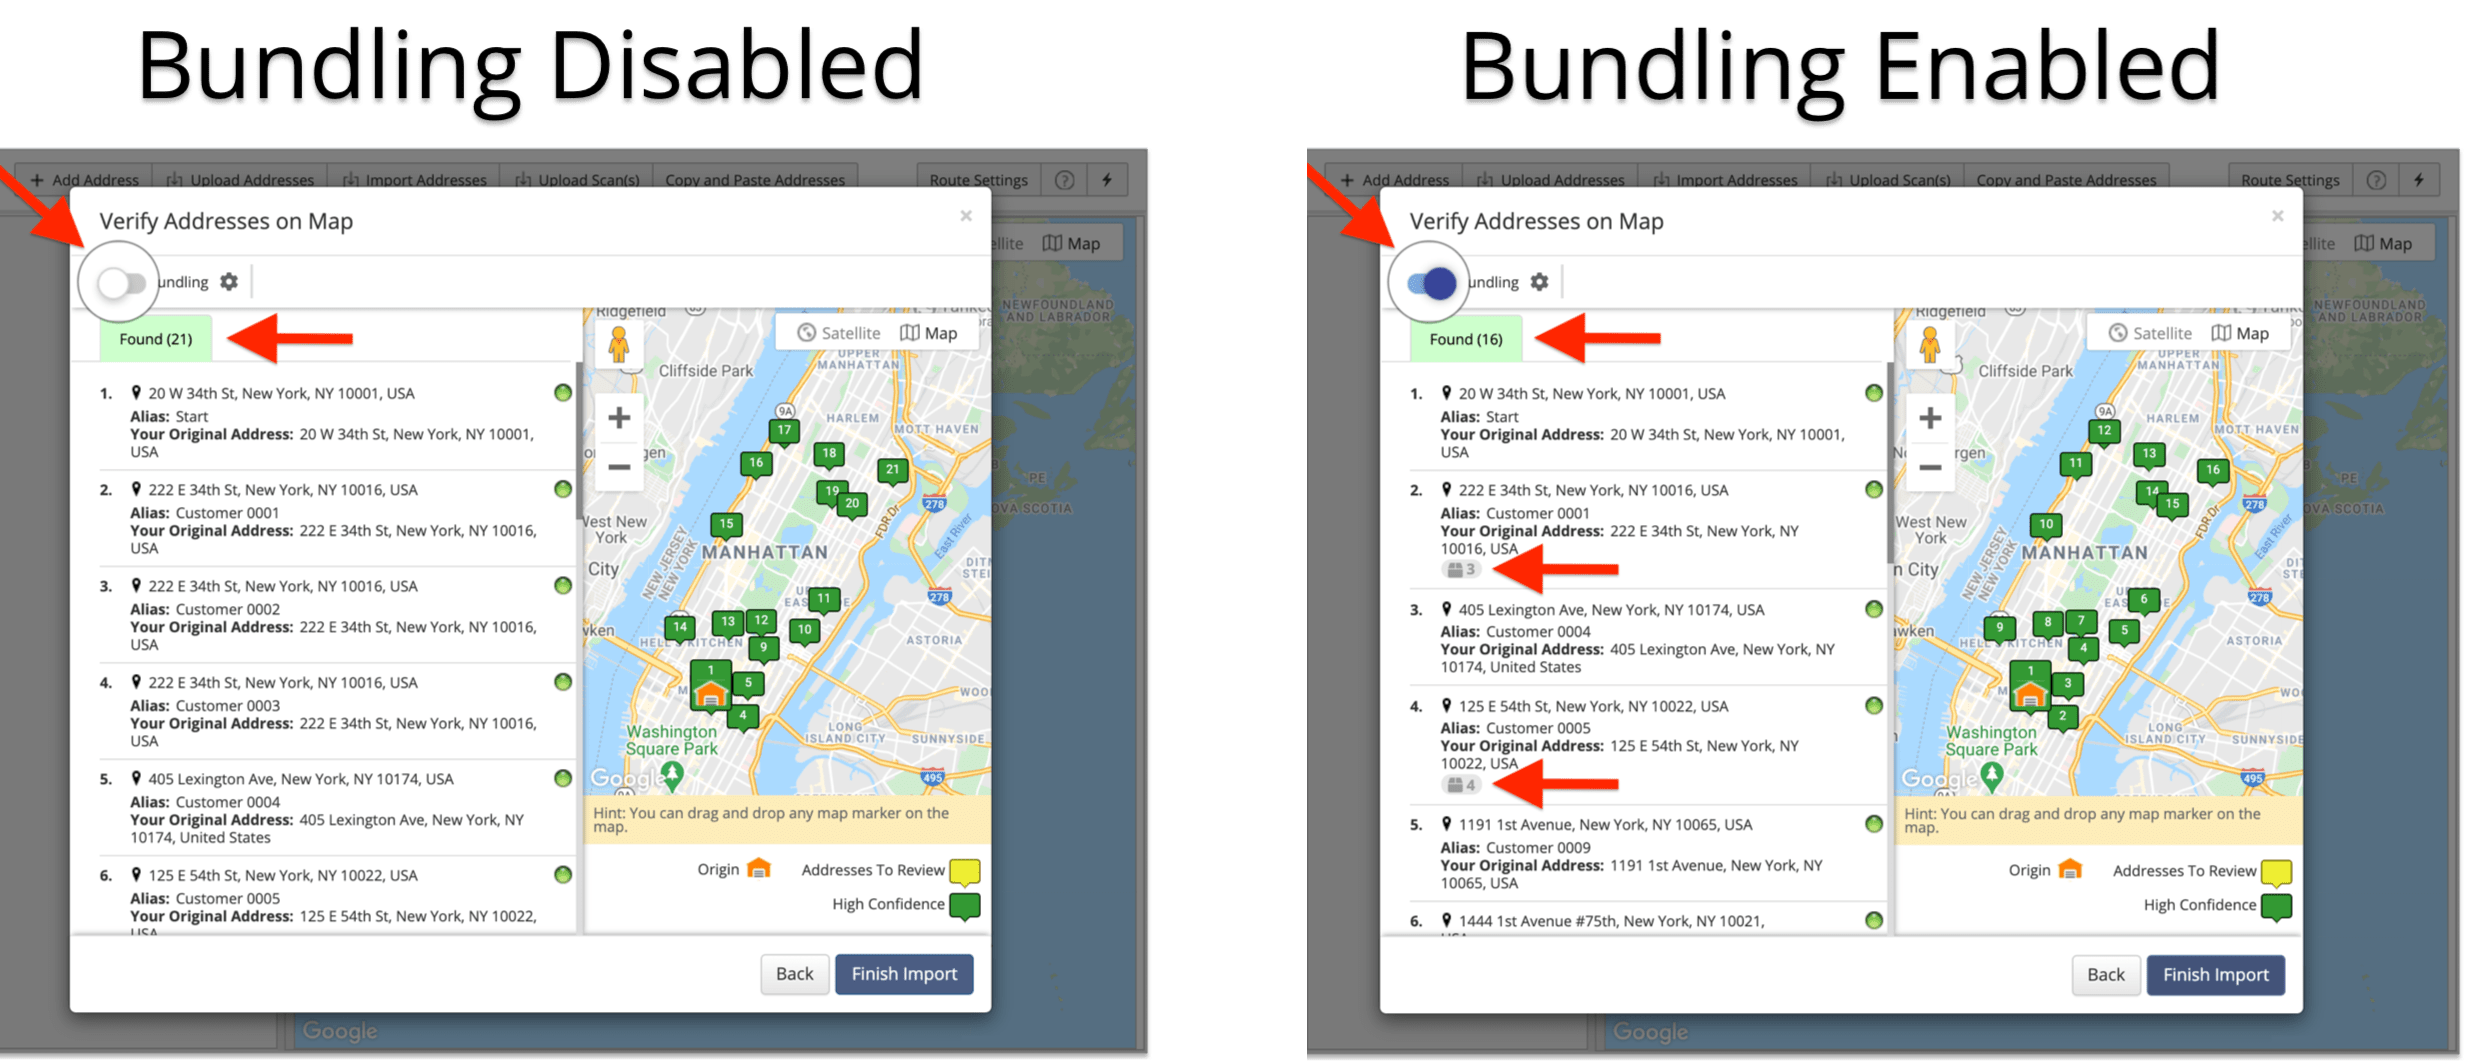 Enable bundling and check what addresses will be bundled based on the applied bundling rules.